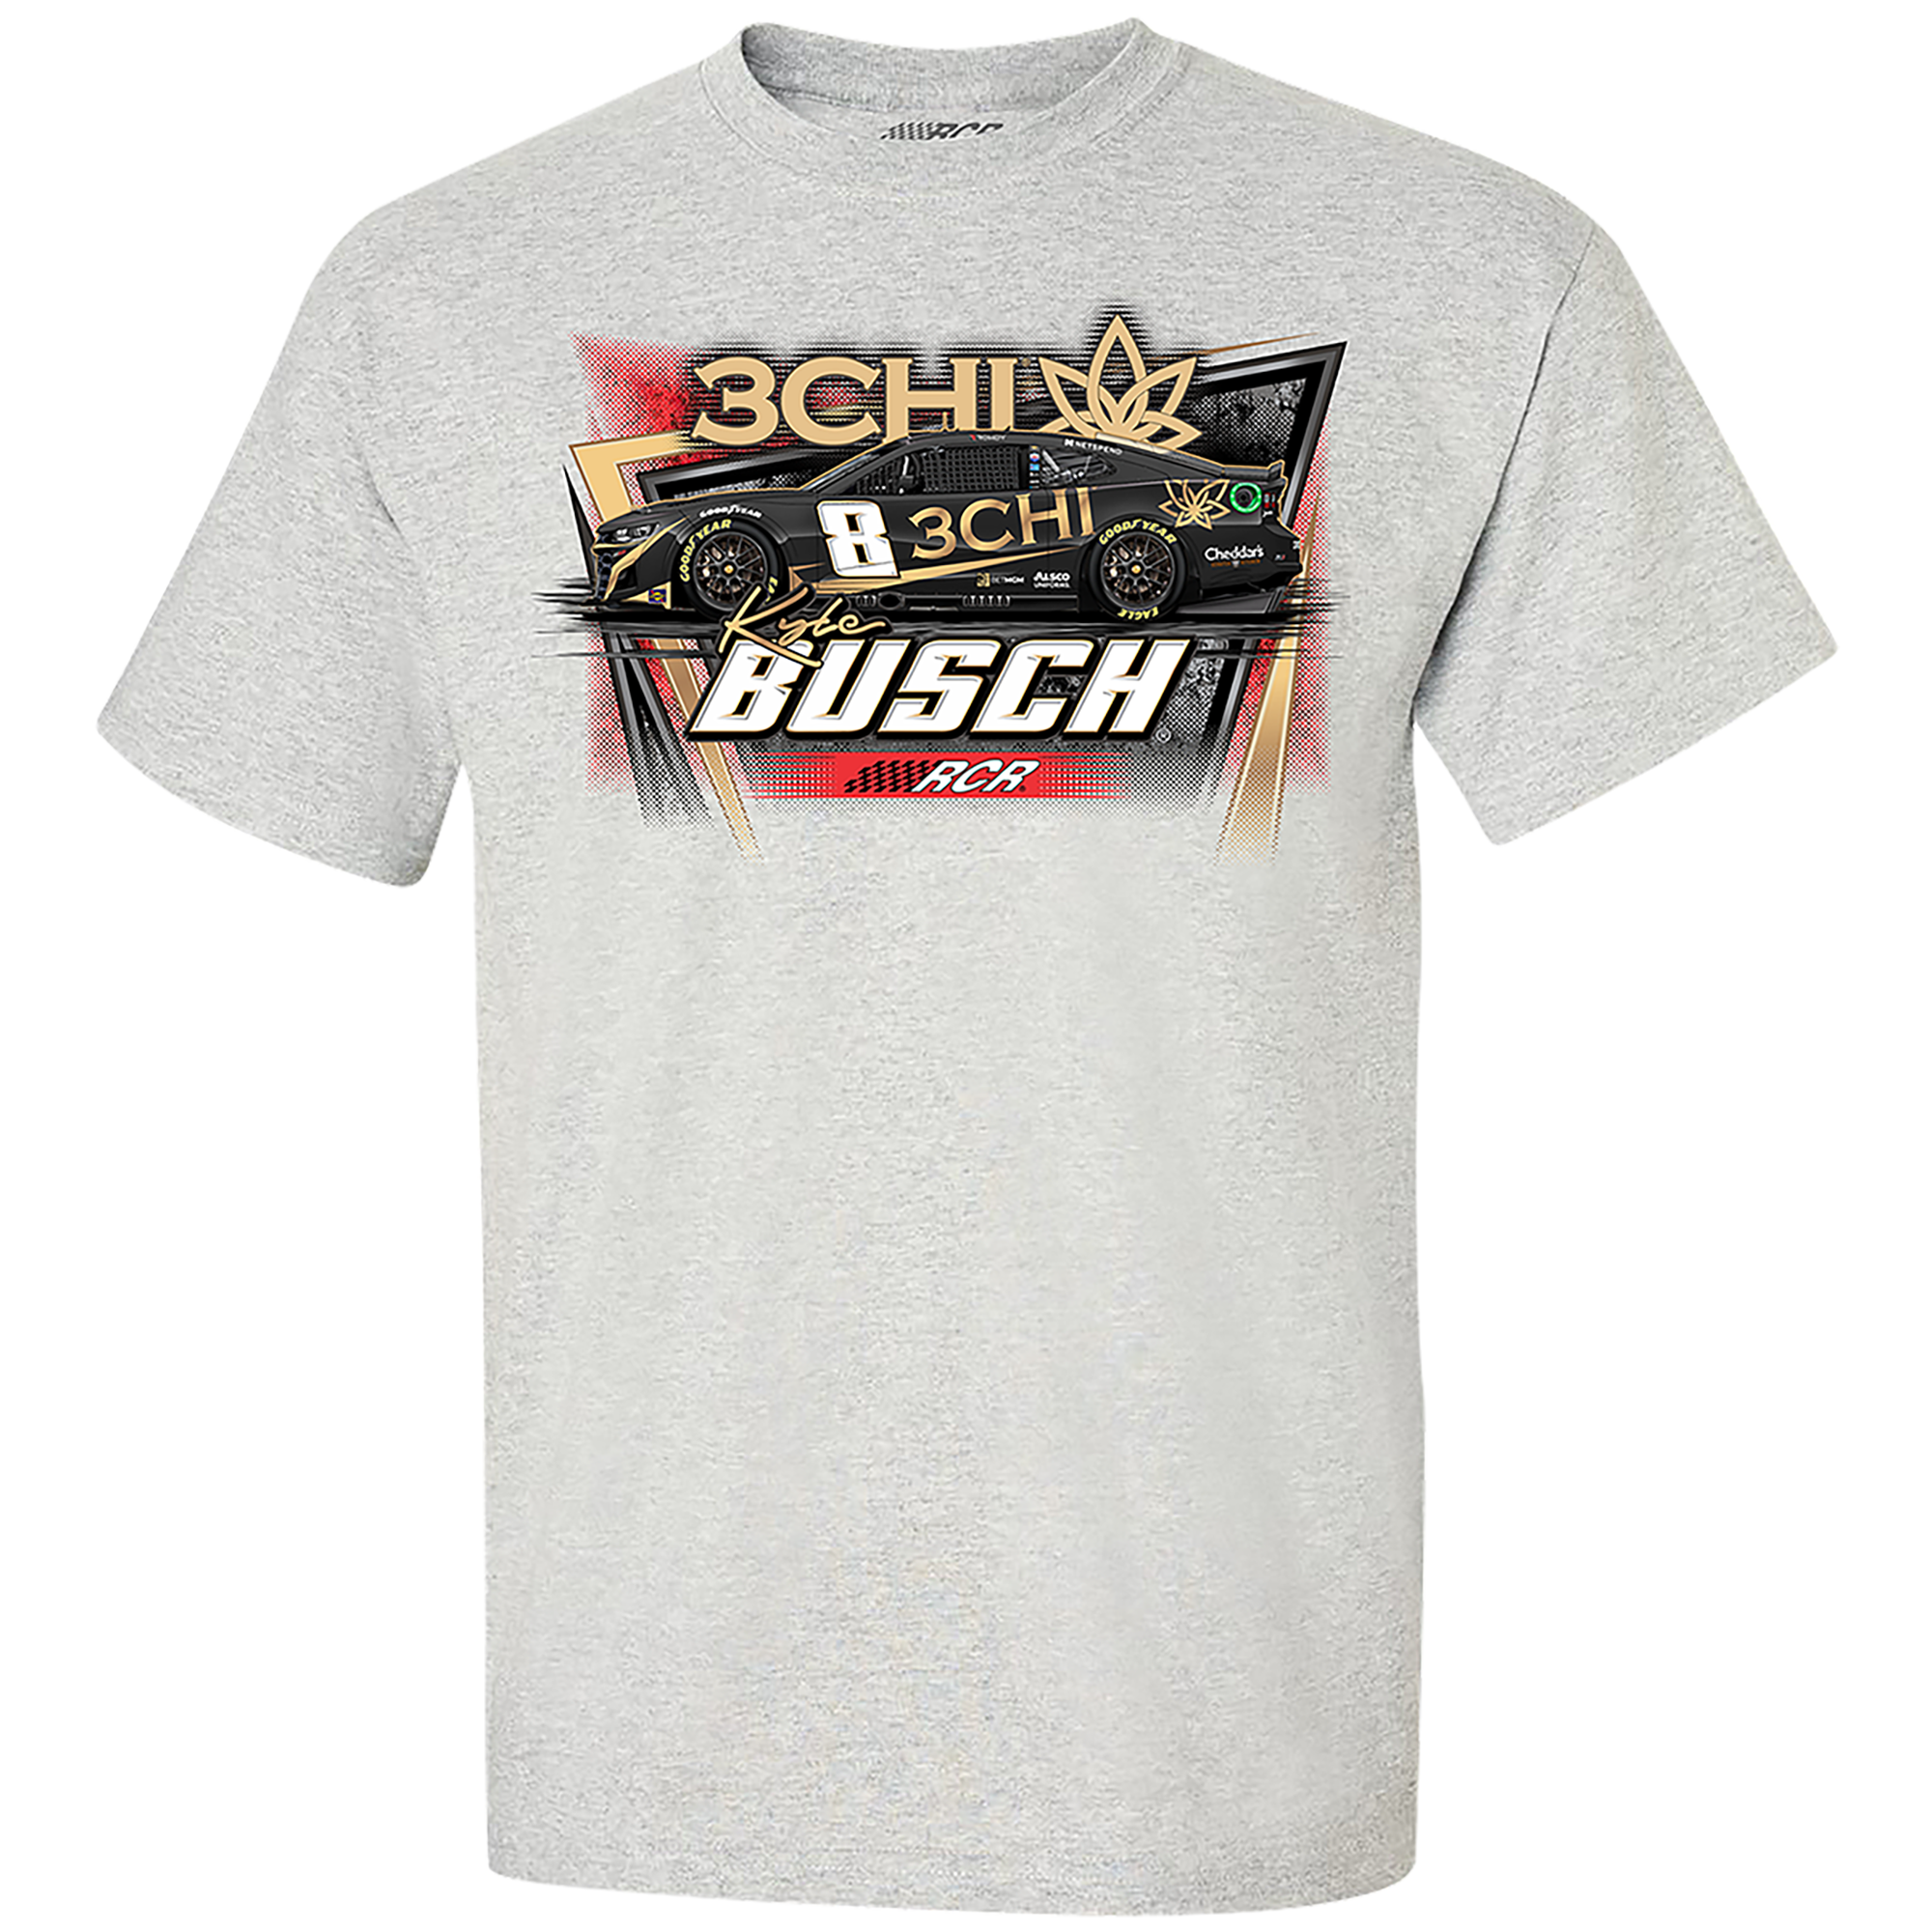 KYLE BUSCH 3CHI 2-SPOT SPORTS GRY TEE